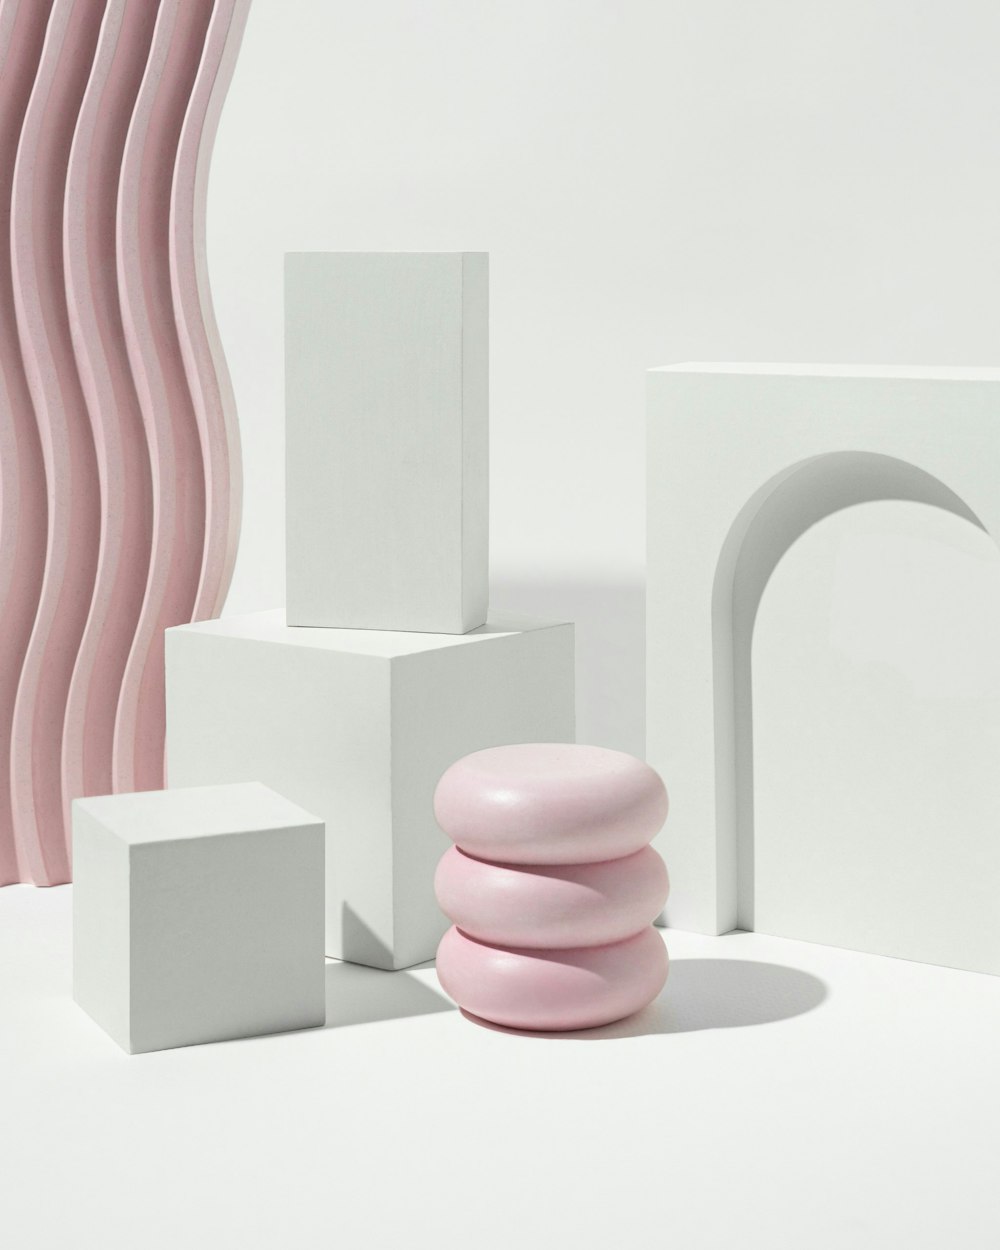 a group of white and pink objects on a white surface